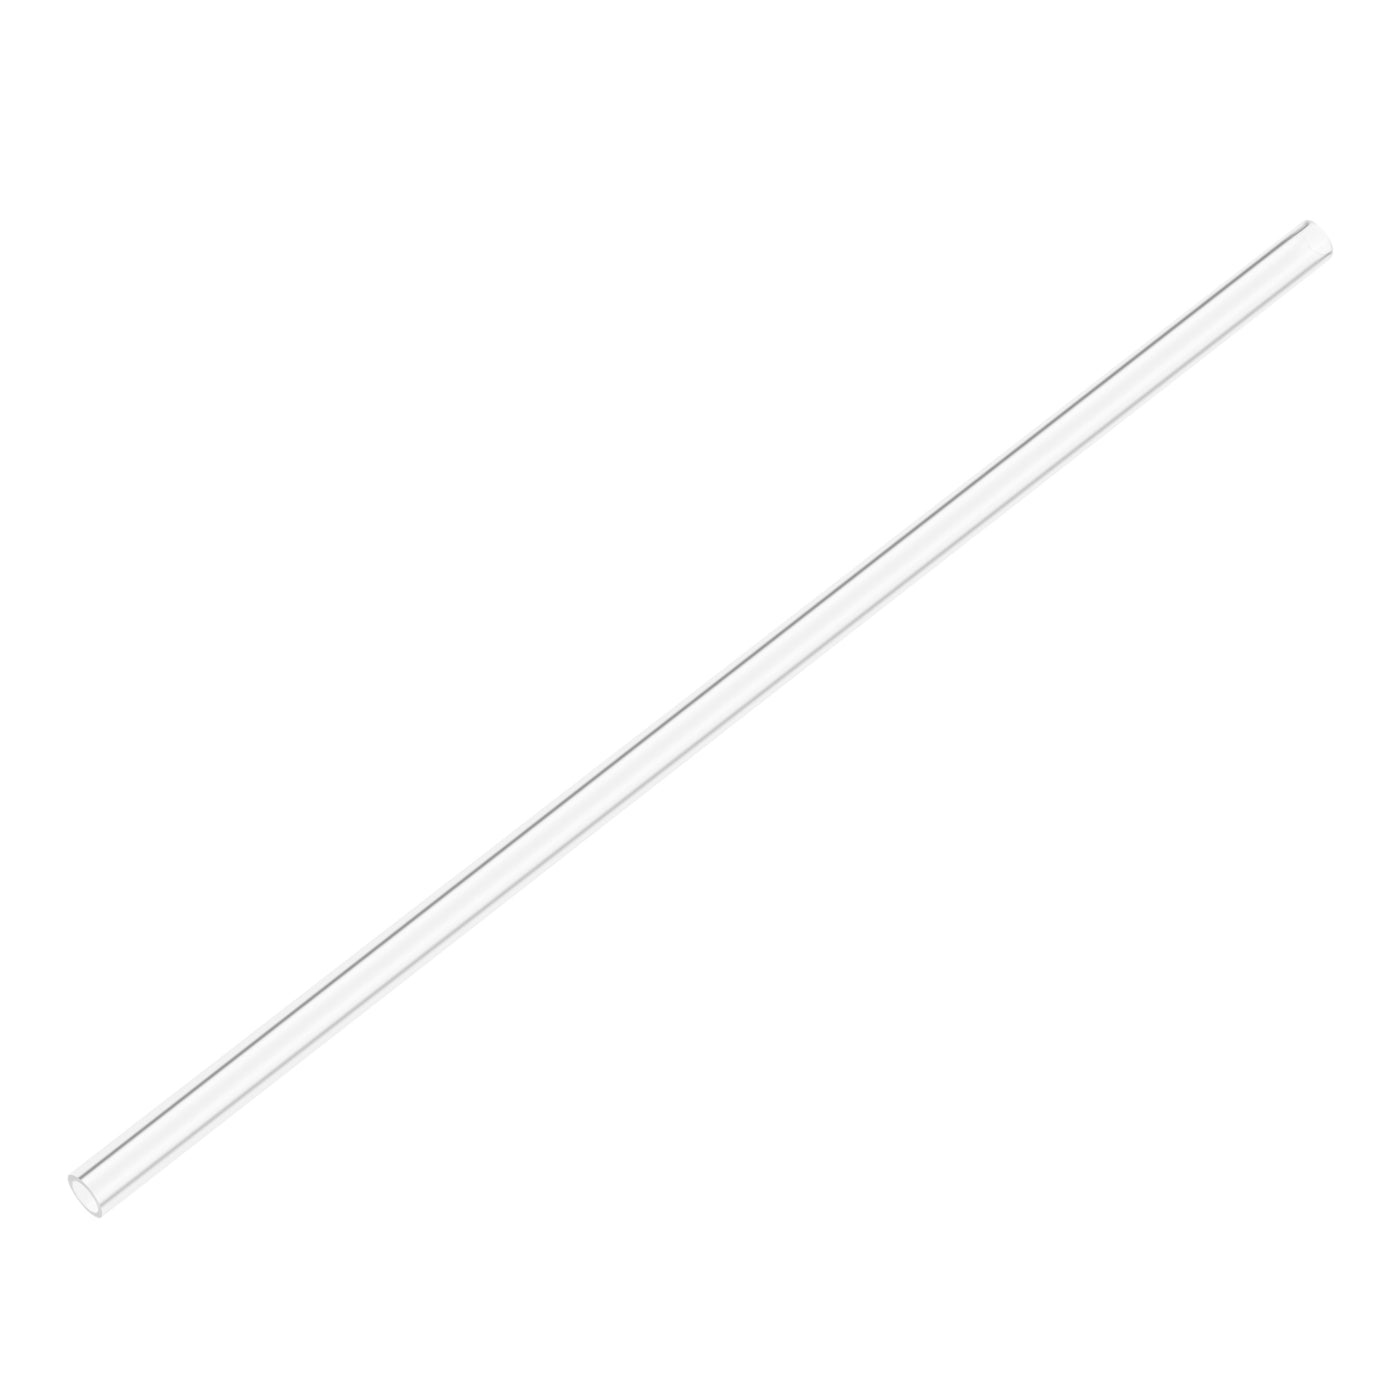 uxcell Uxcell Rigid Acrylic Pipes Round Tube Tubing